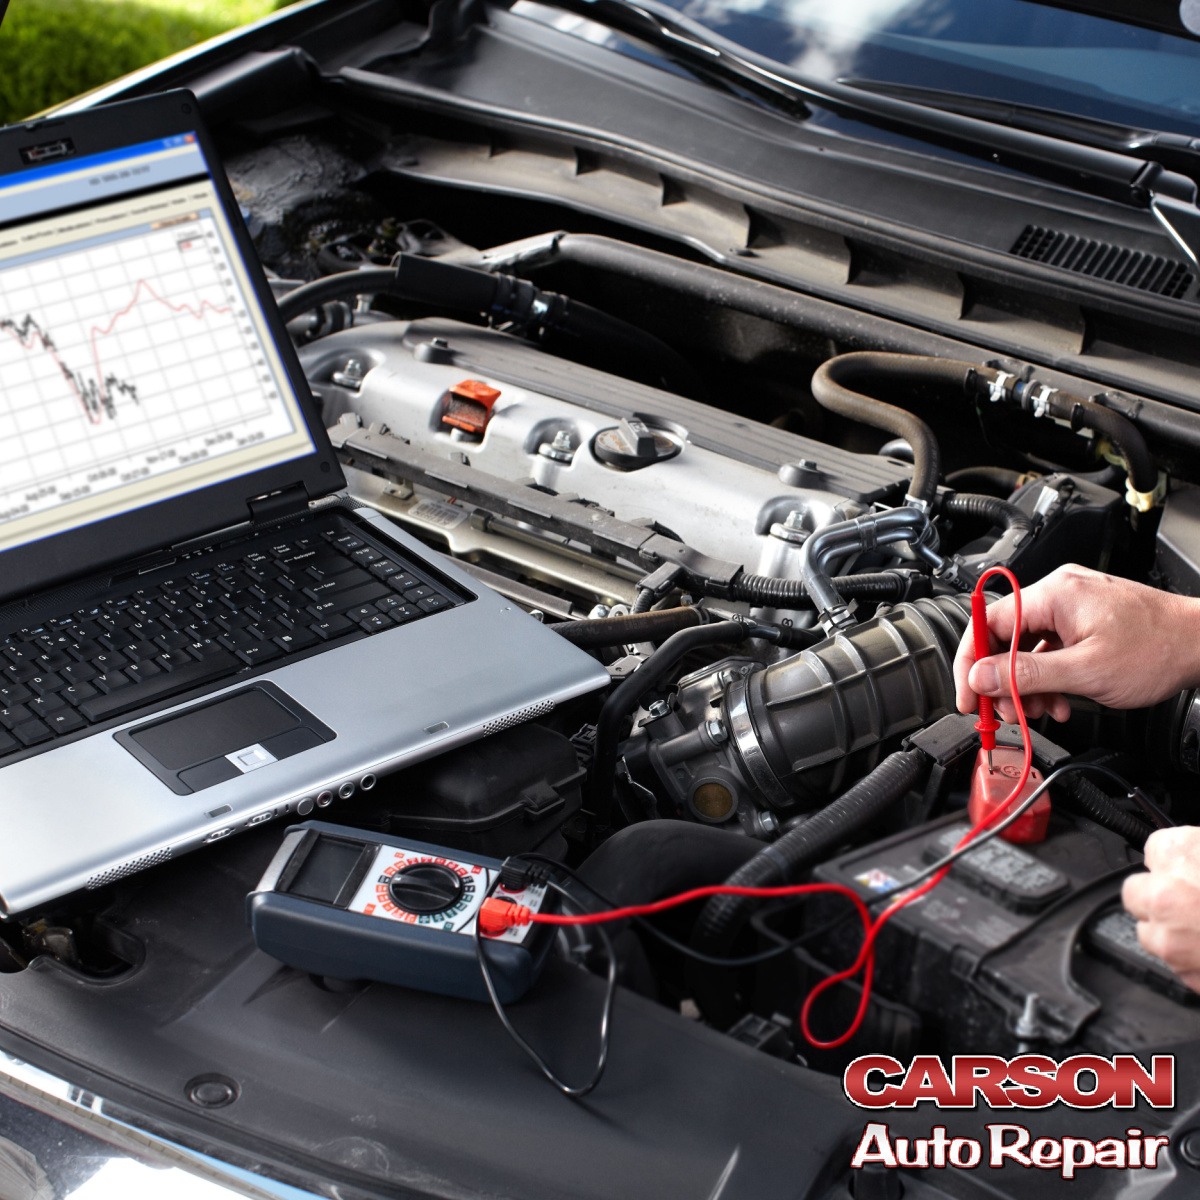 Repair and Replacement Auto Parts to Ensure Comfort and Safety